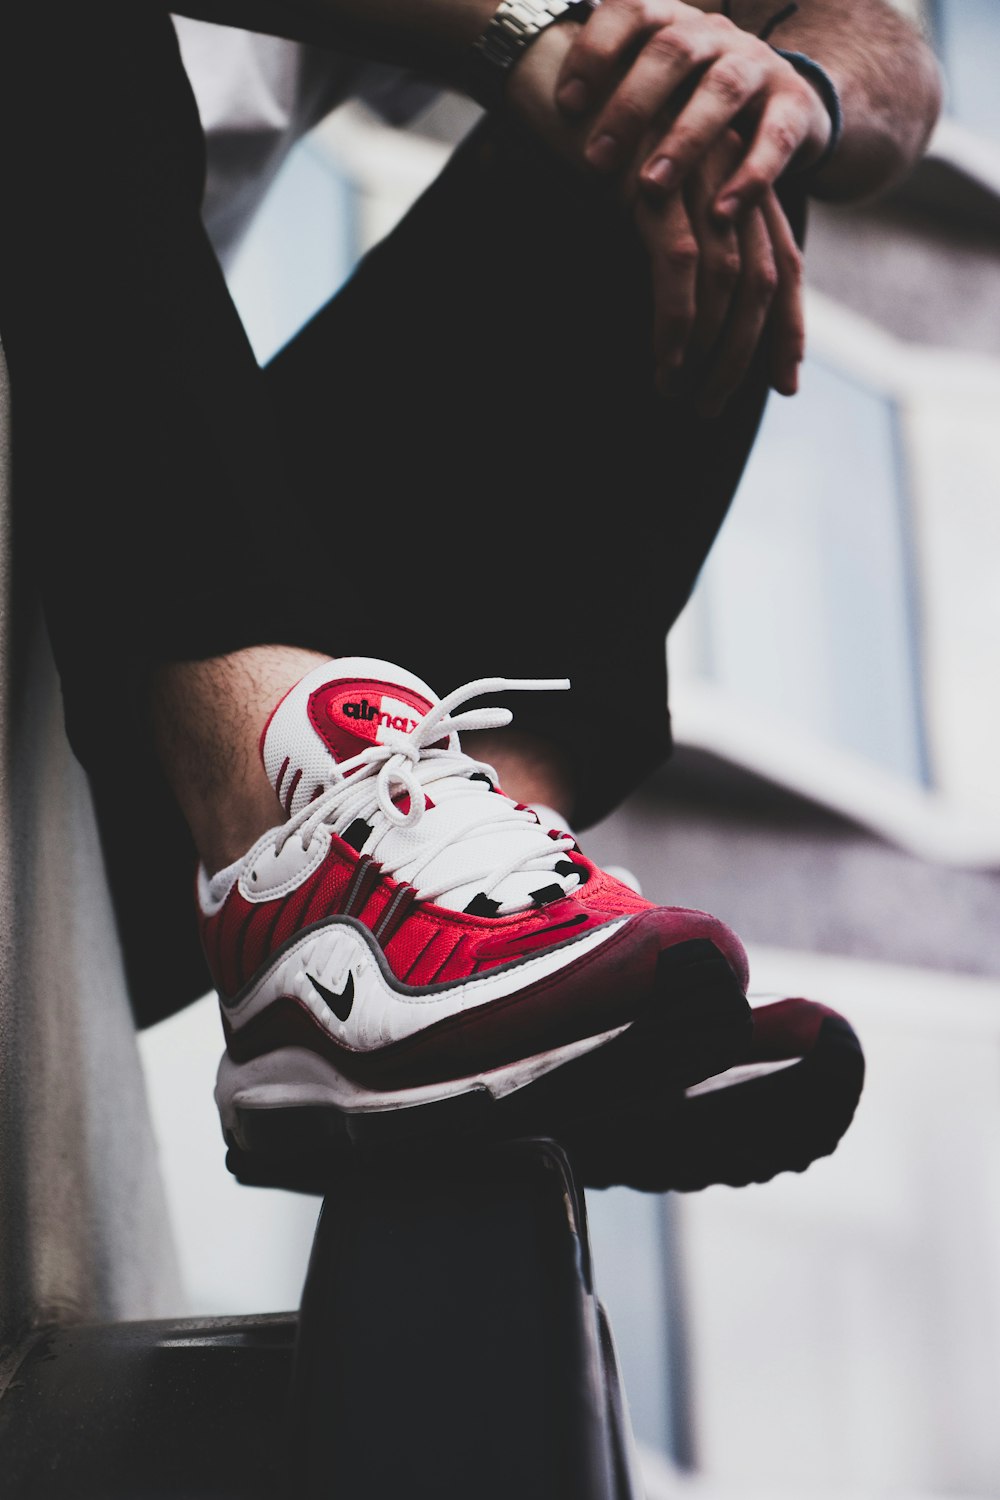 red-and-white Nike Air Max shoes\